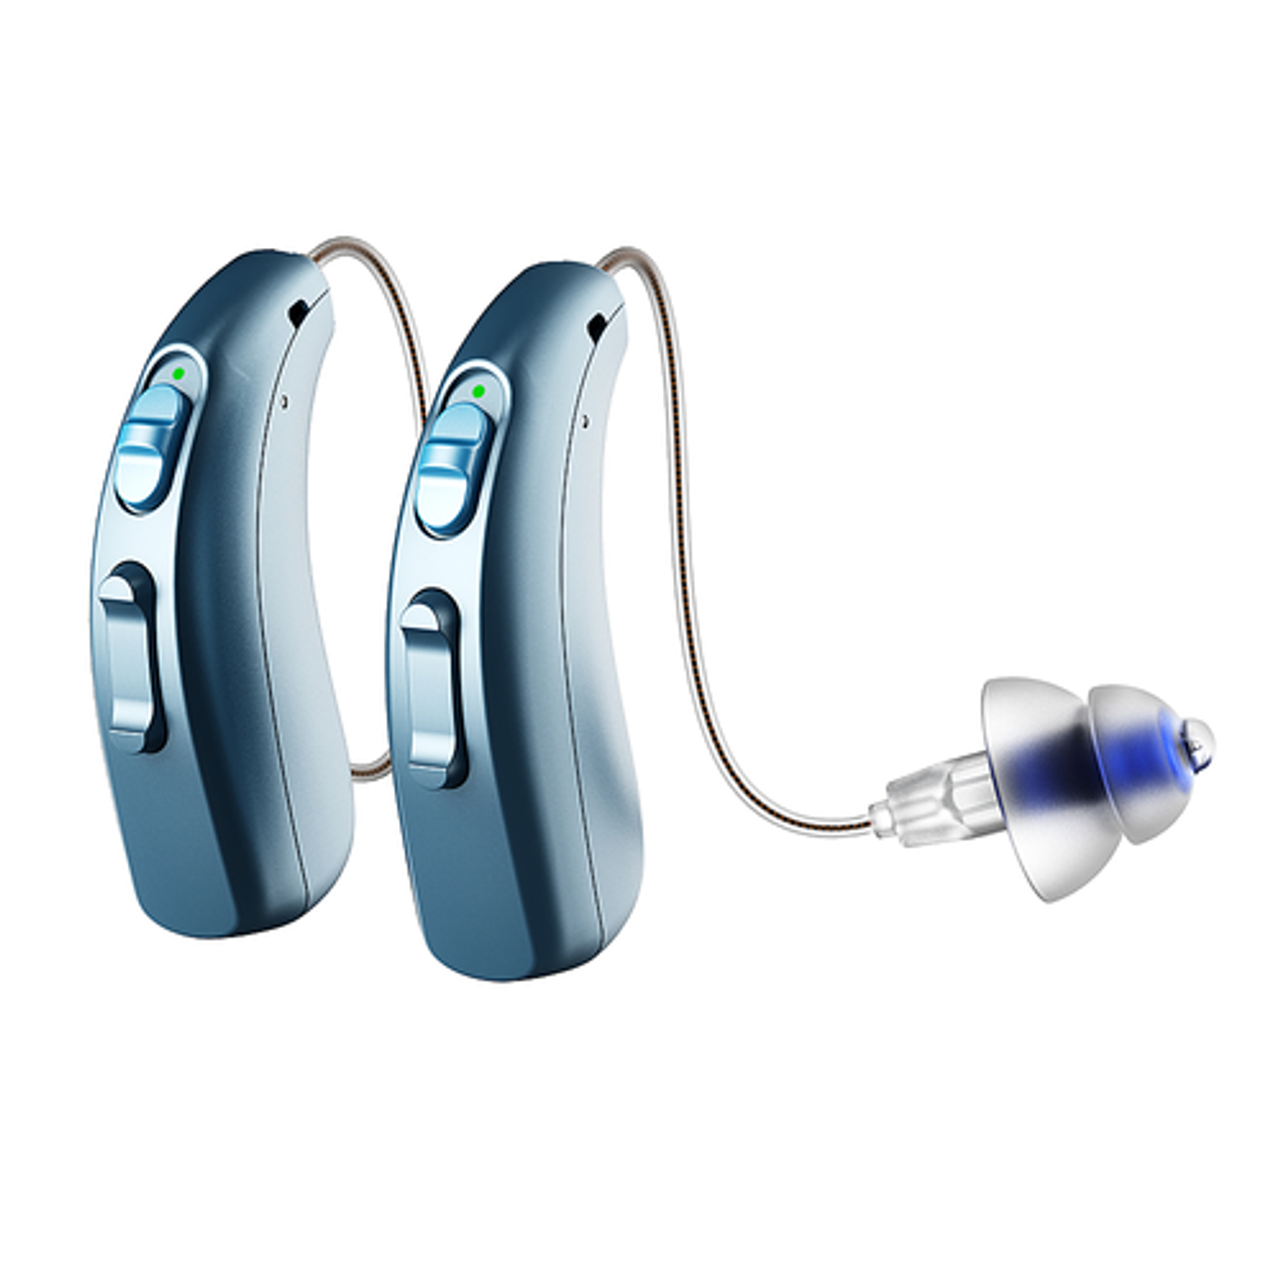 LINNER Mercury OTC Rechargeable Hearing Aids for Seniors with Noise Cancellation, Easy to Use, 3 Modes, 8 Volume Levels - Ocean Blue